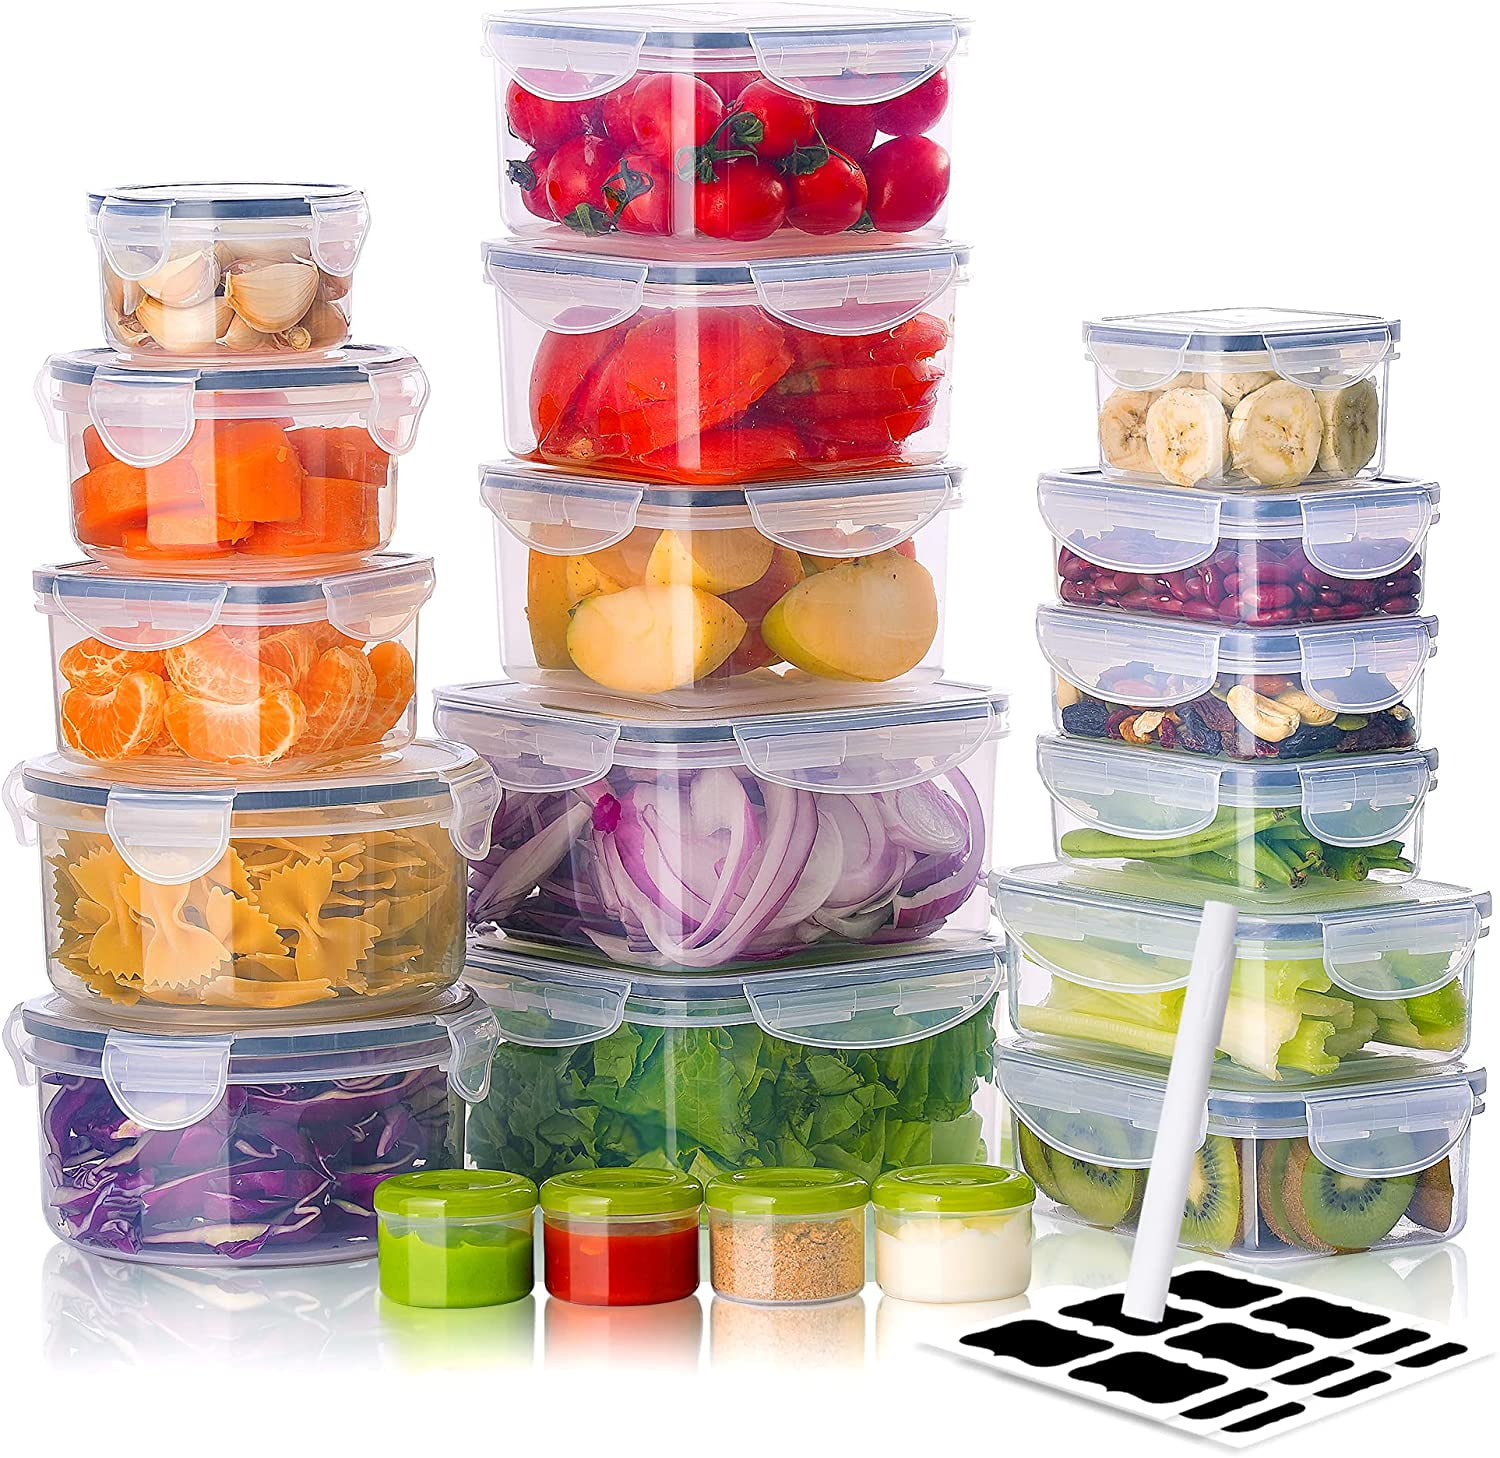 Plastic Food Storage Containers with Lids - Large 16 Cup (128 oz) Airtight Container Box for Food Storage, Freezer, Microwave and Dishwasher Safe